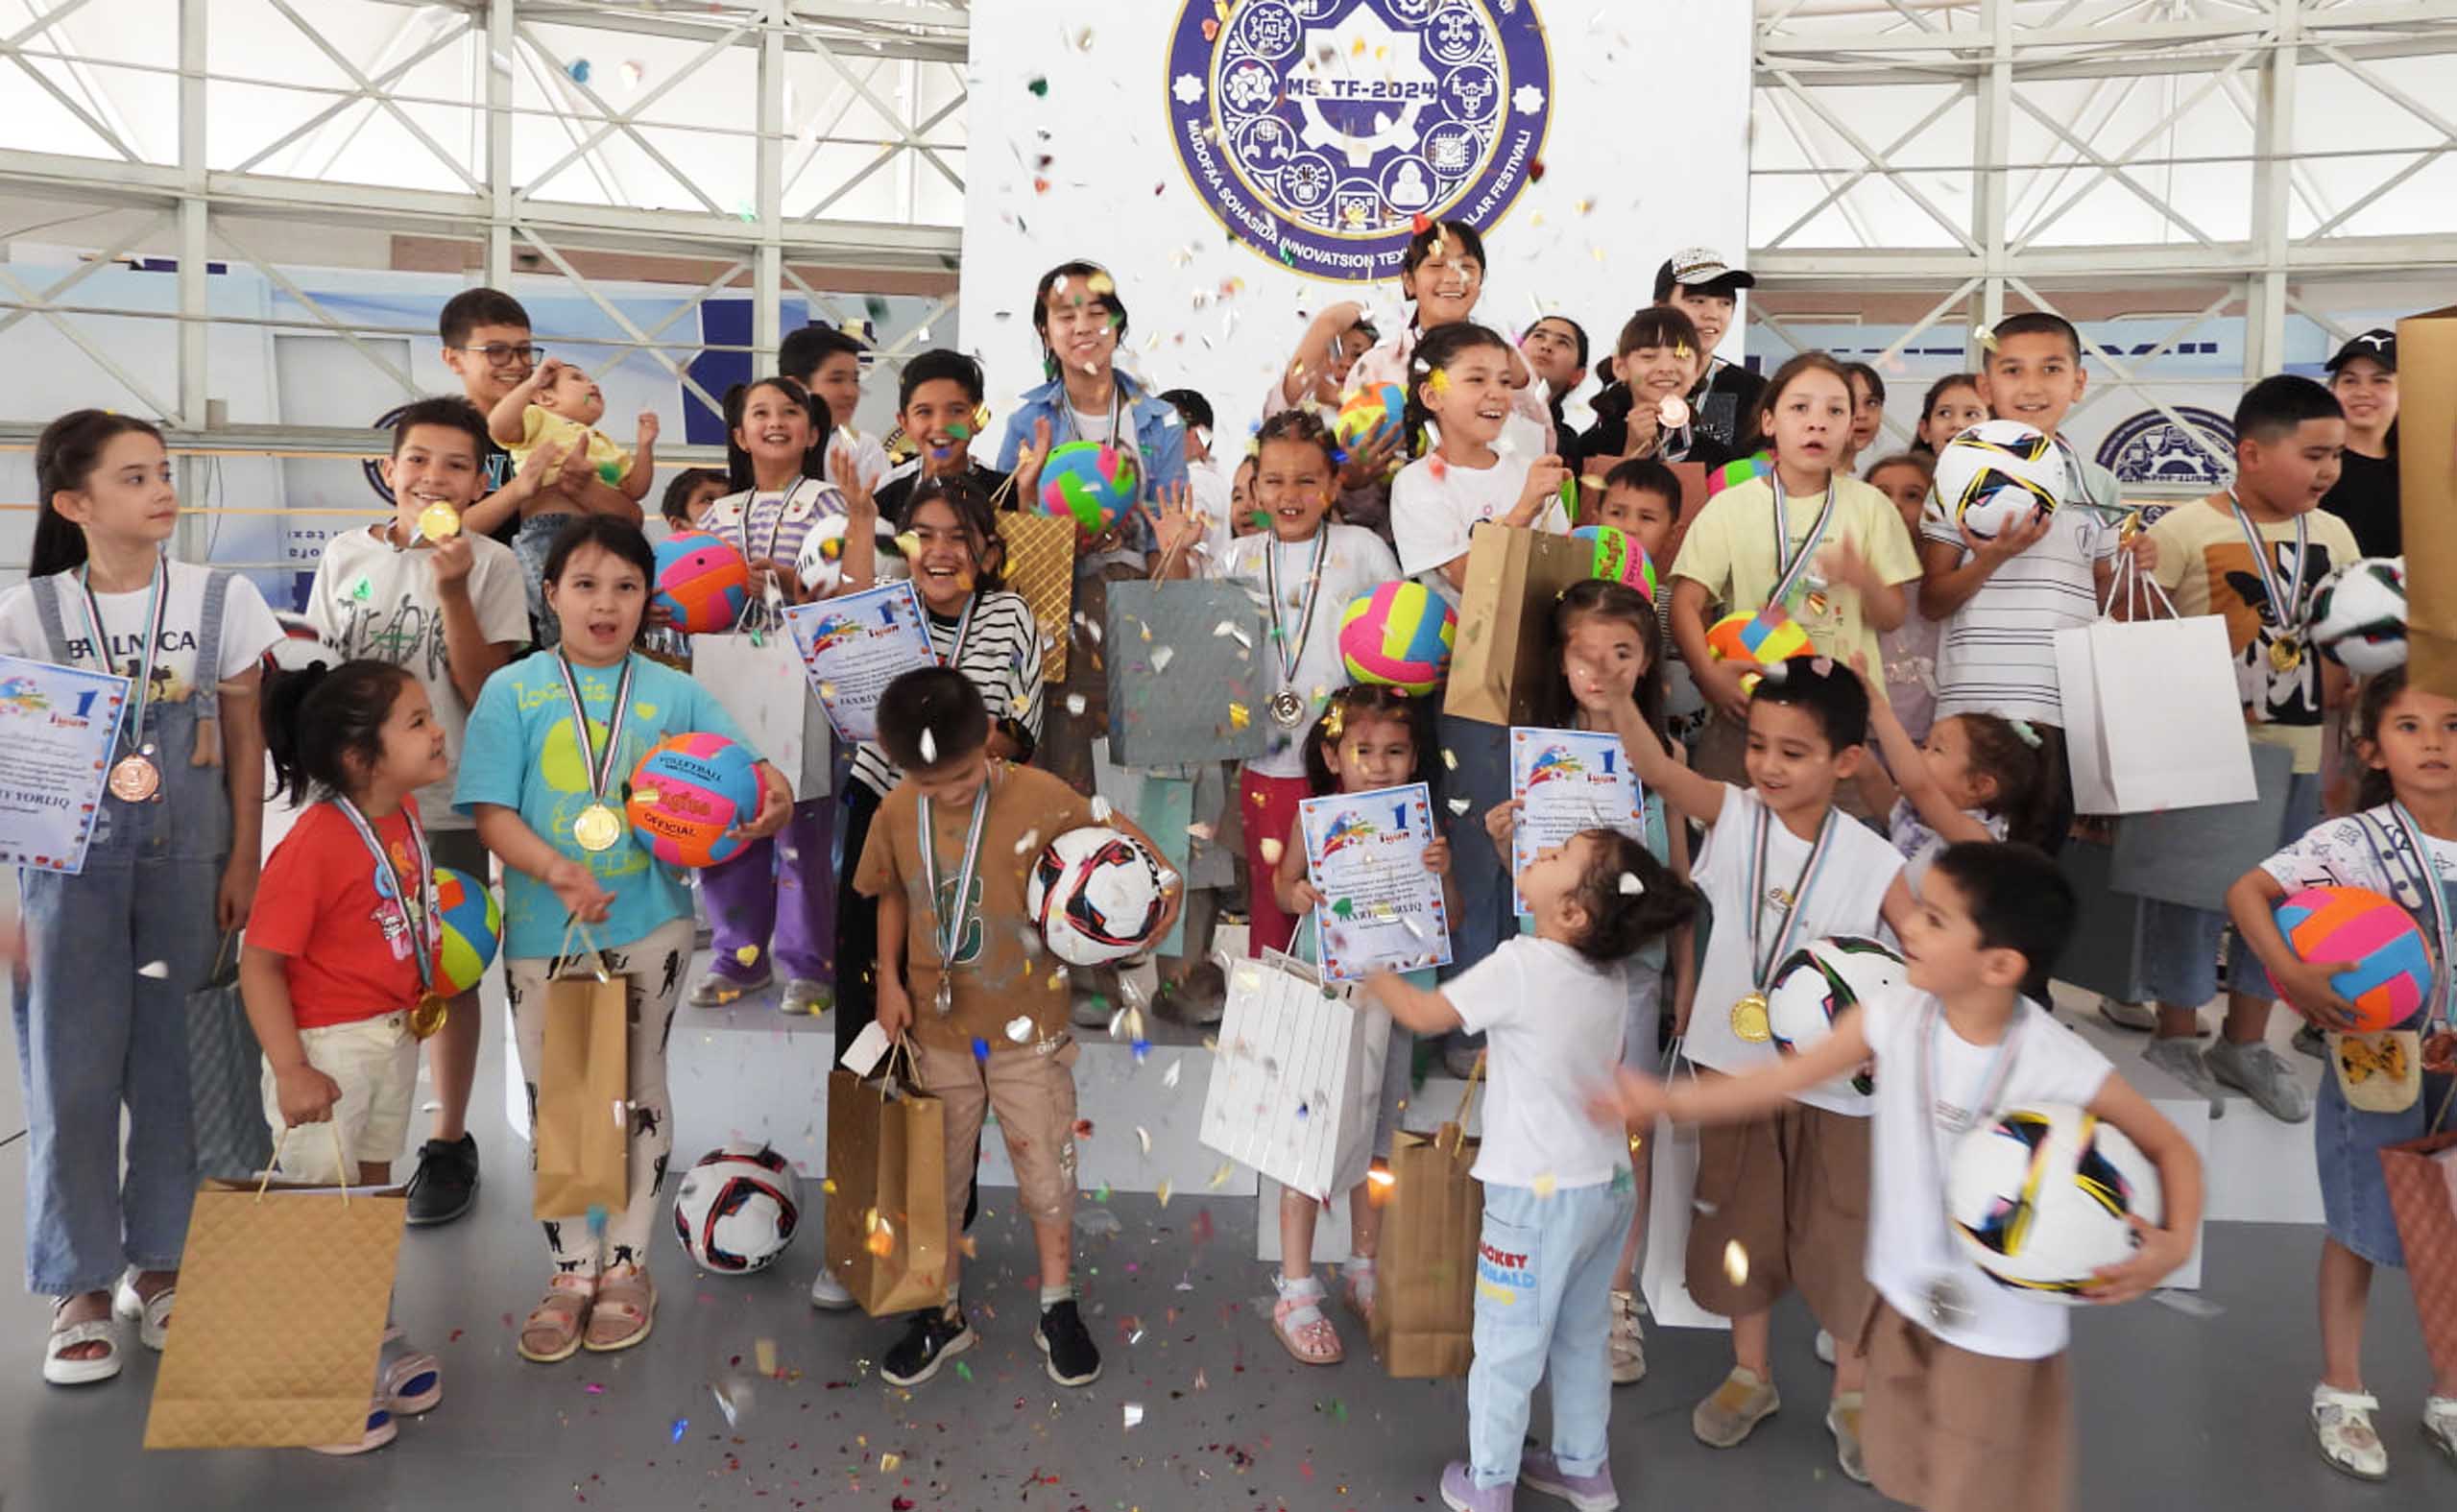 June 1-International Day for the protection of children was held in a high spirits in our country